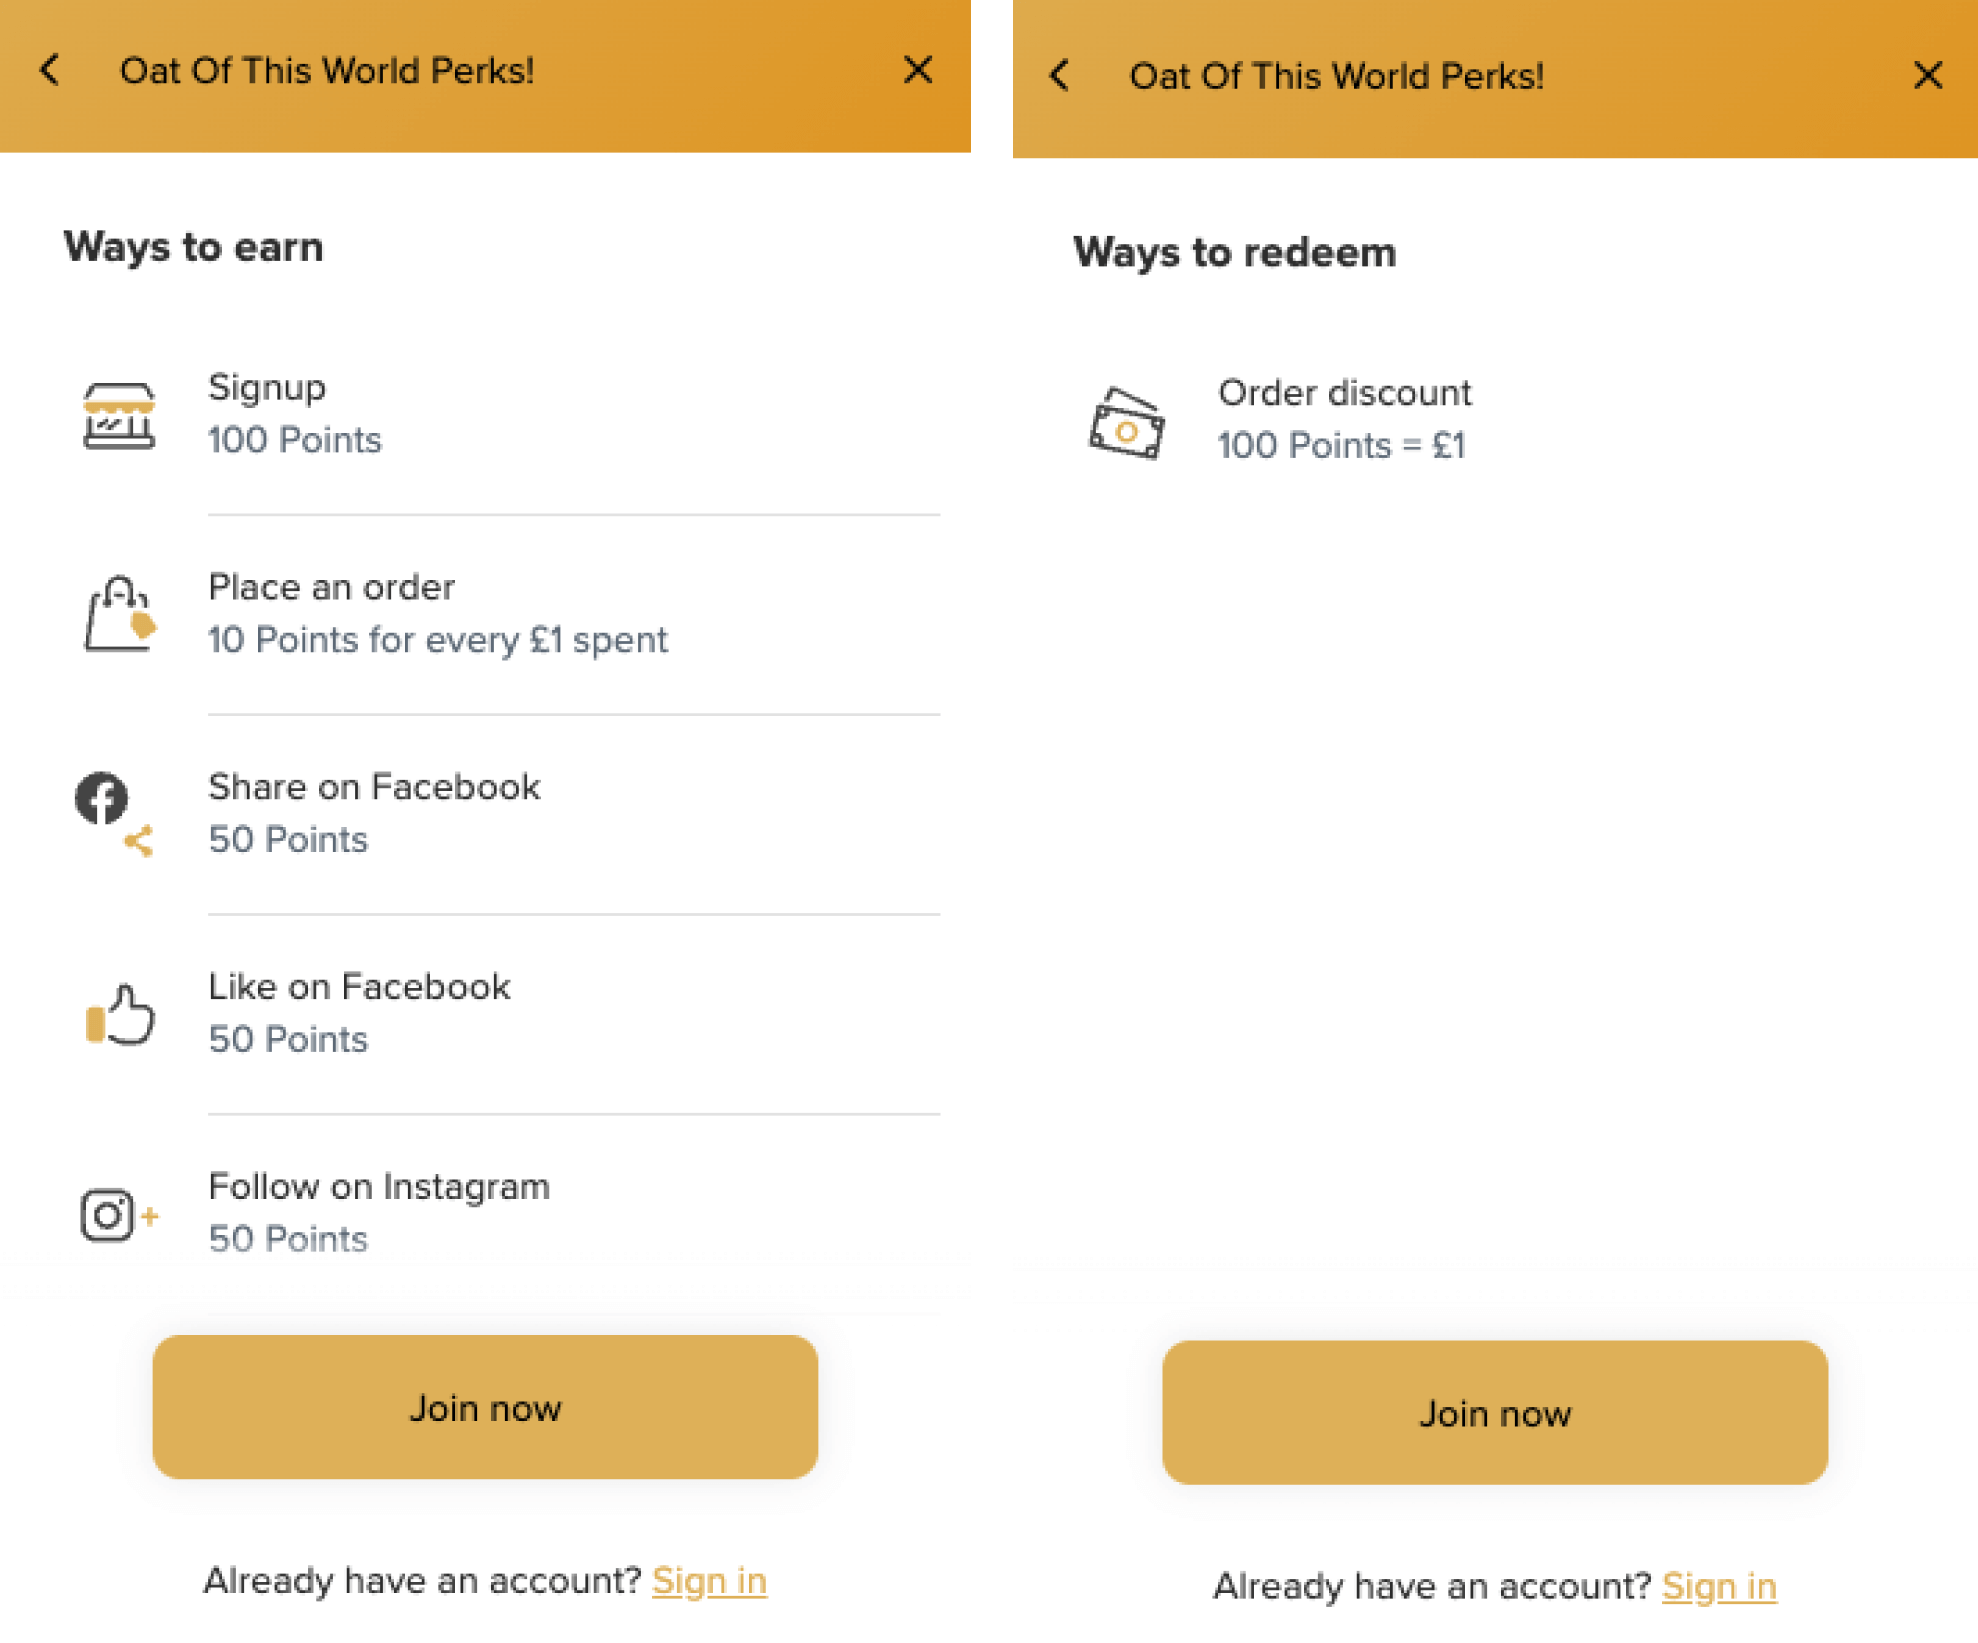 A screenshot of Oatopia’s loyalty program panel showing the ways to earn and redeem points. It highlights that customers earn 10 points per £1 spent when placing an order and they can redeem 100 points for £1 off a future purchase. 